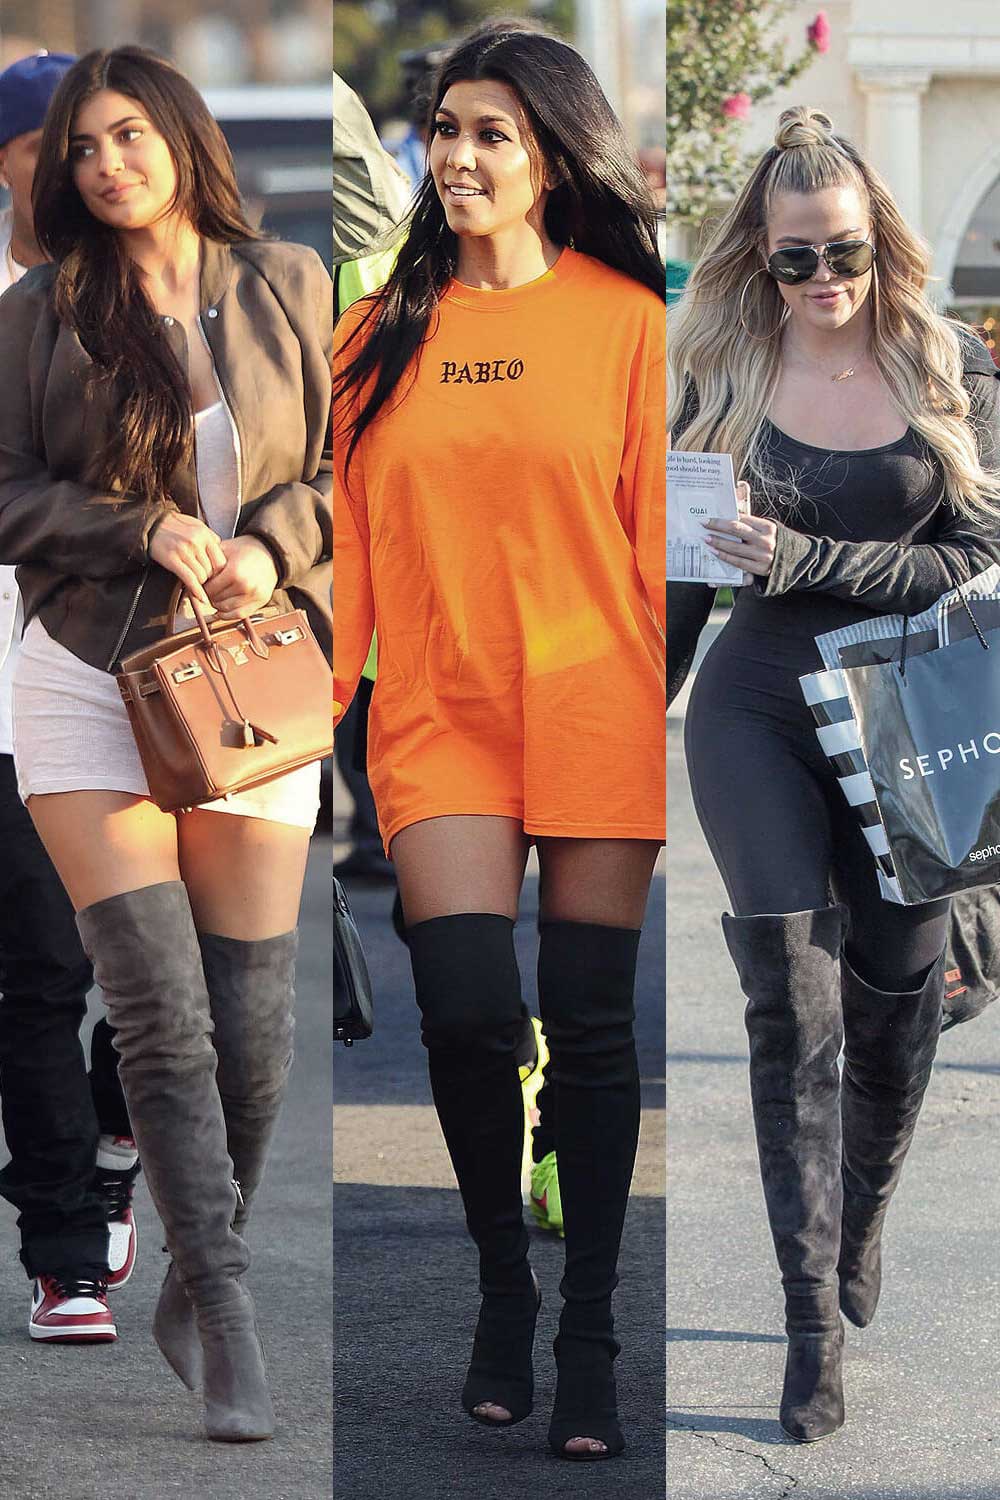 K sisters in over-the-knee boots